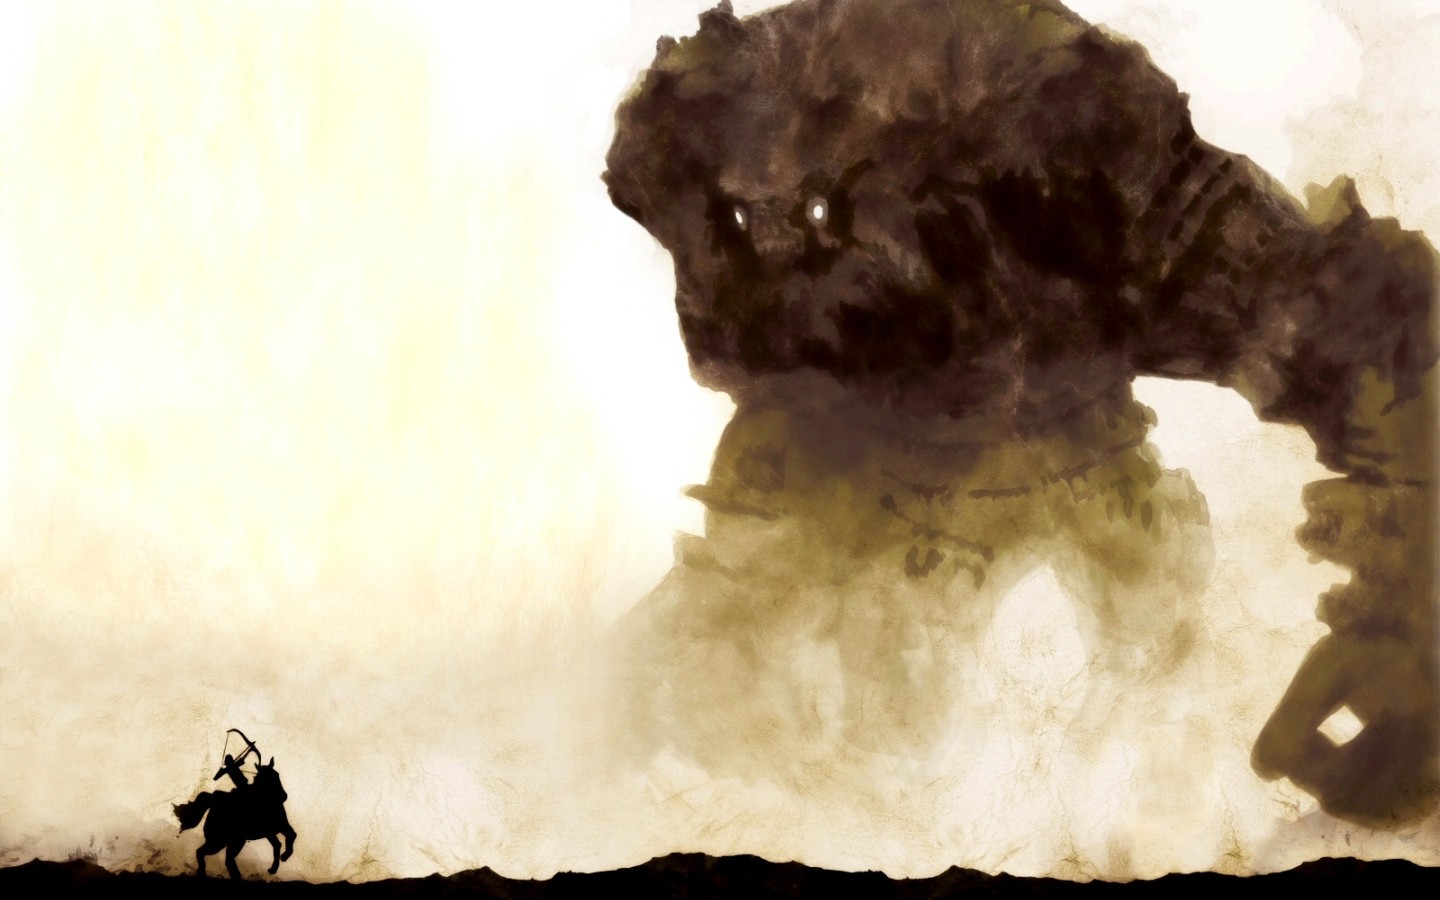 Shadow of the Colossus, Video games, Giant, Colossal Titan, Artwork, Fantasy art Wallpaper